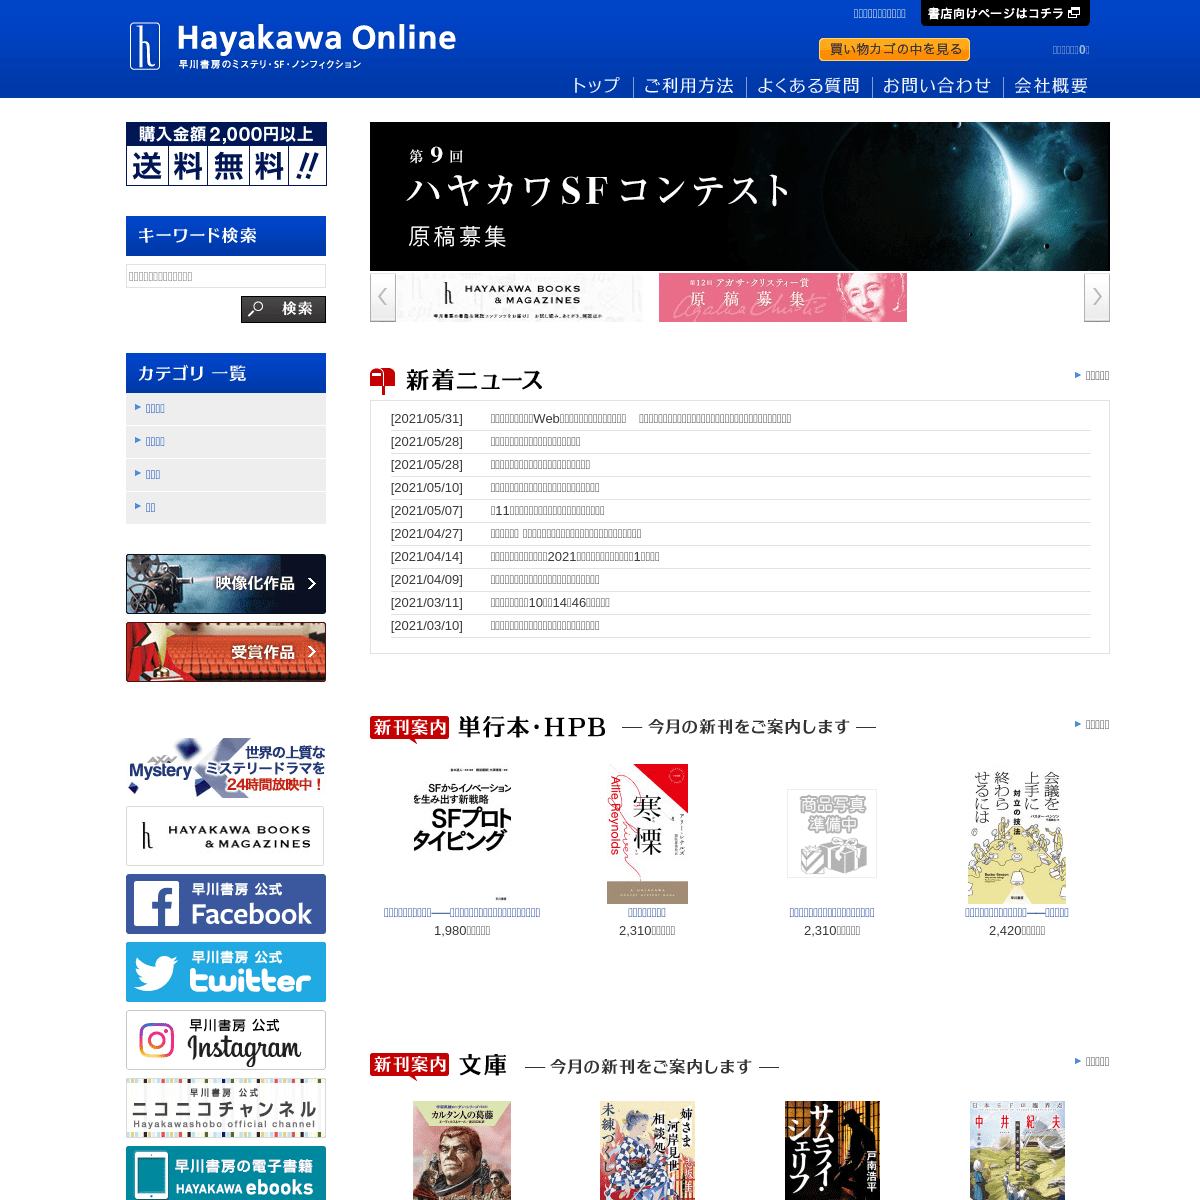 A complete backup of https://hayakawa-online.co.jp